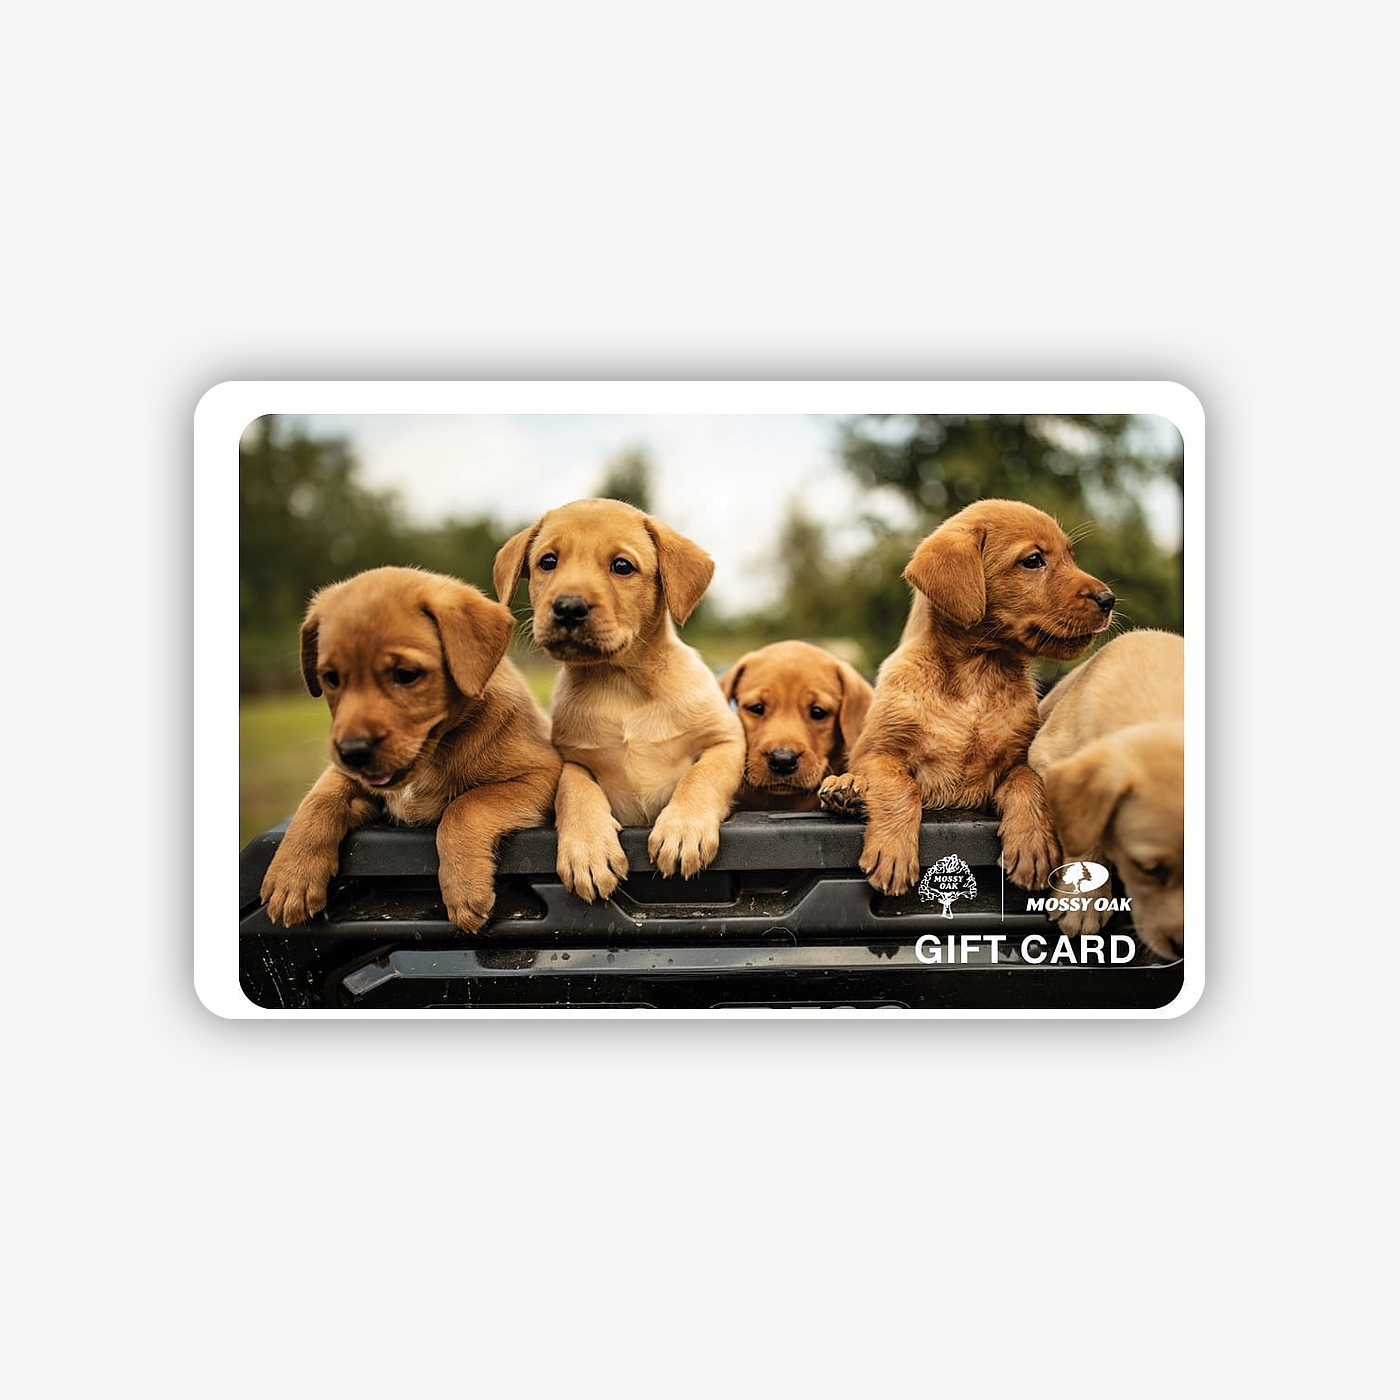 5 cute puppies looking over the side of a stationary pickup truck bed.